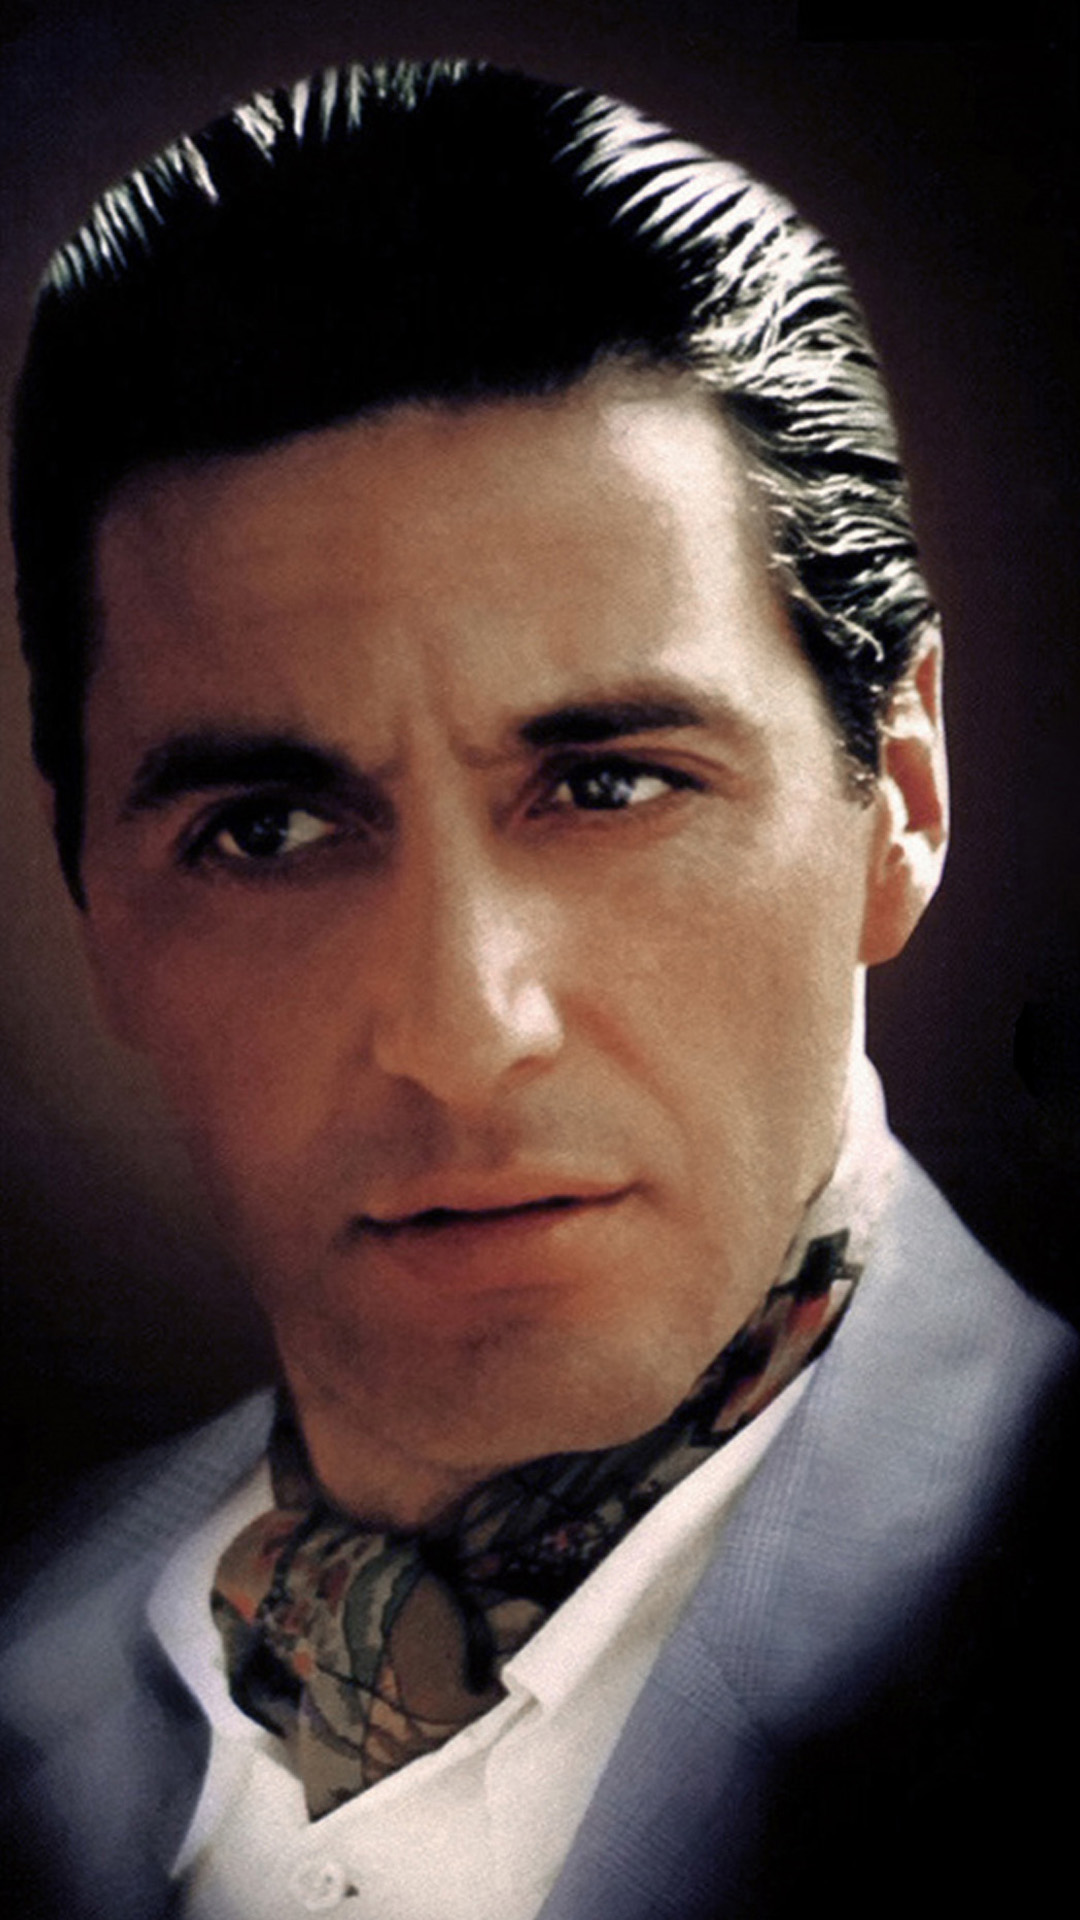 The Godfather Micheal Corleone Sony Xperia Z2 Wallpapers | Xperia ...